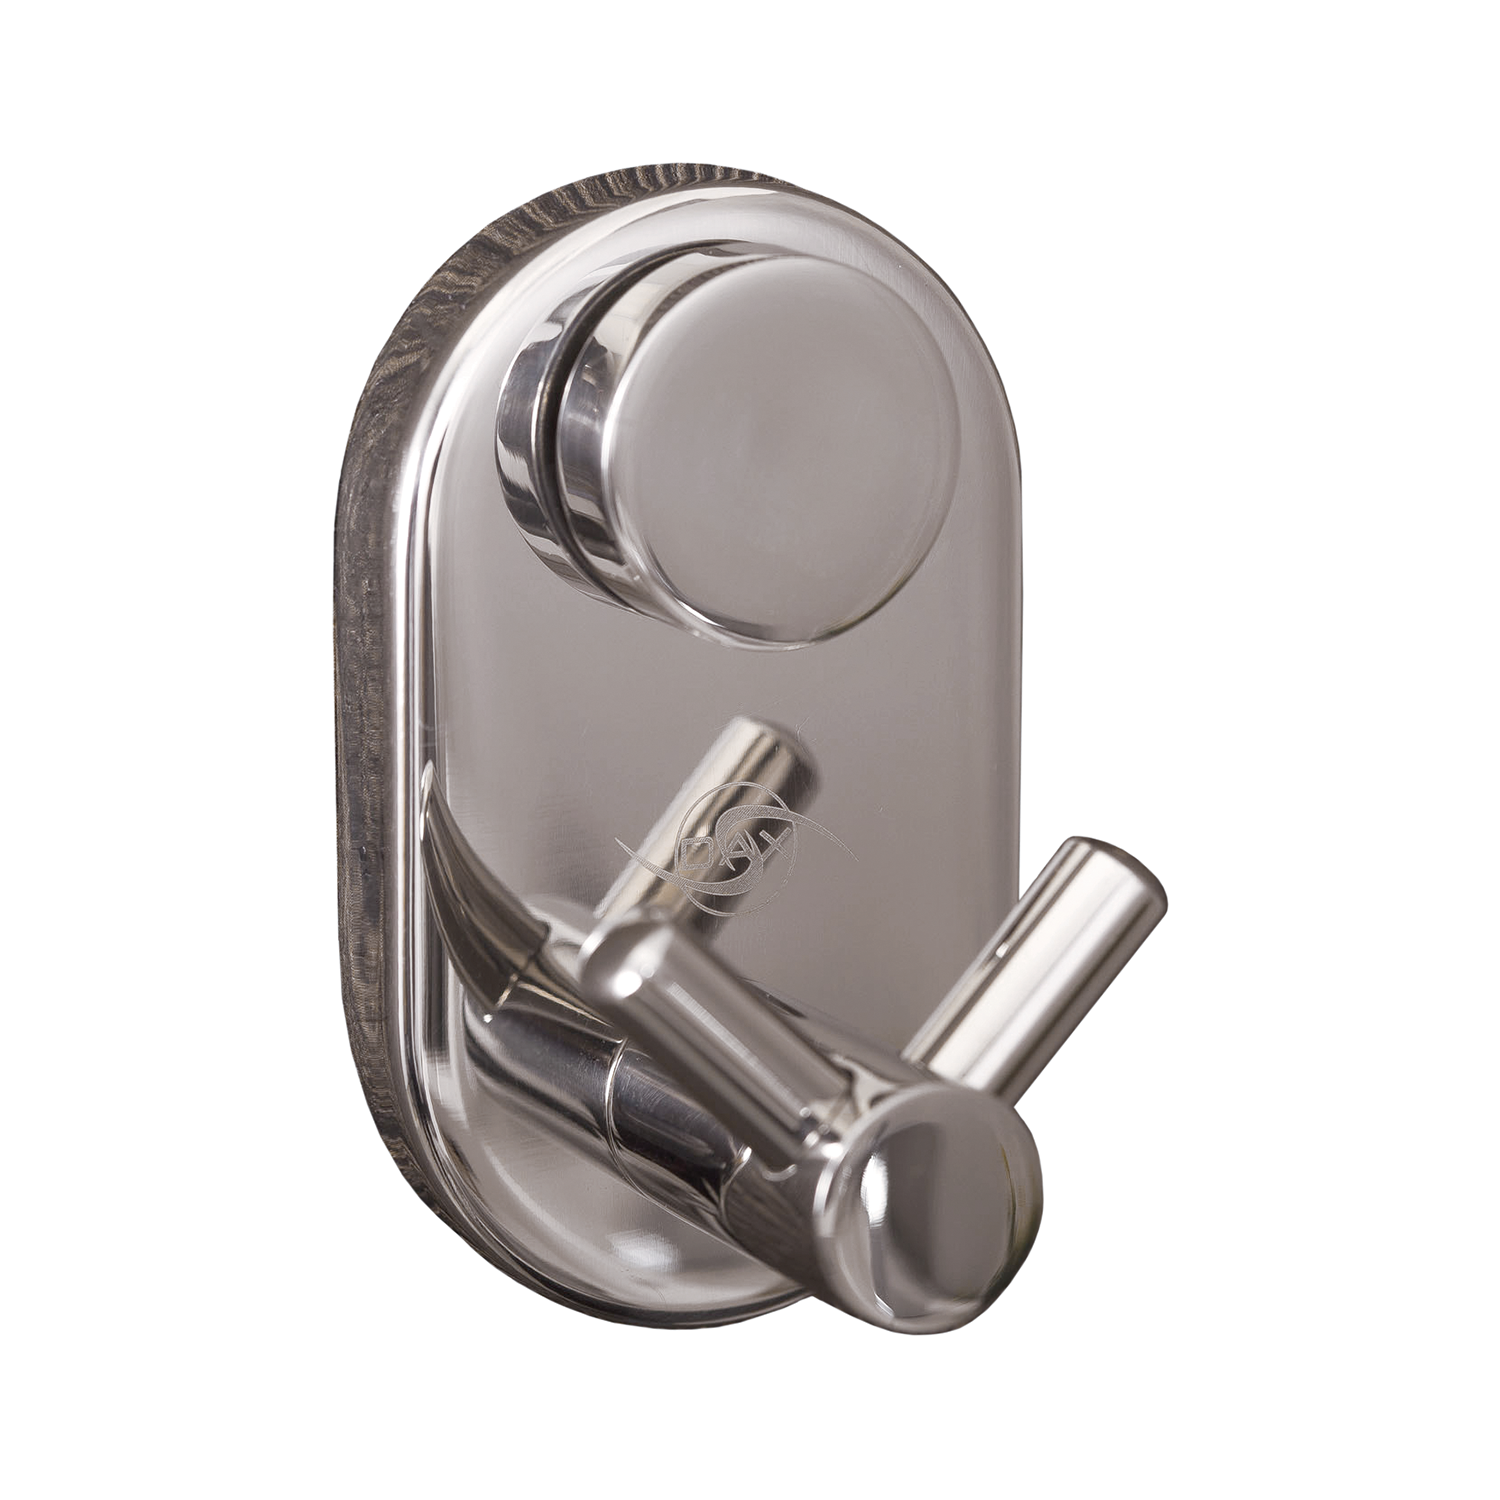 DAX Double Bathroom Hook, Wall Mount Stainless Steel, Satin Finish, 1